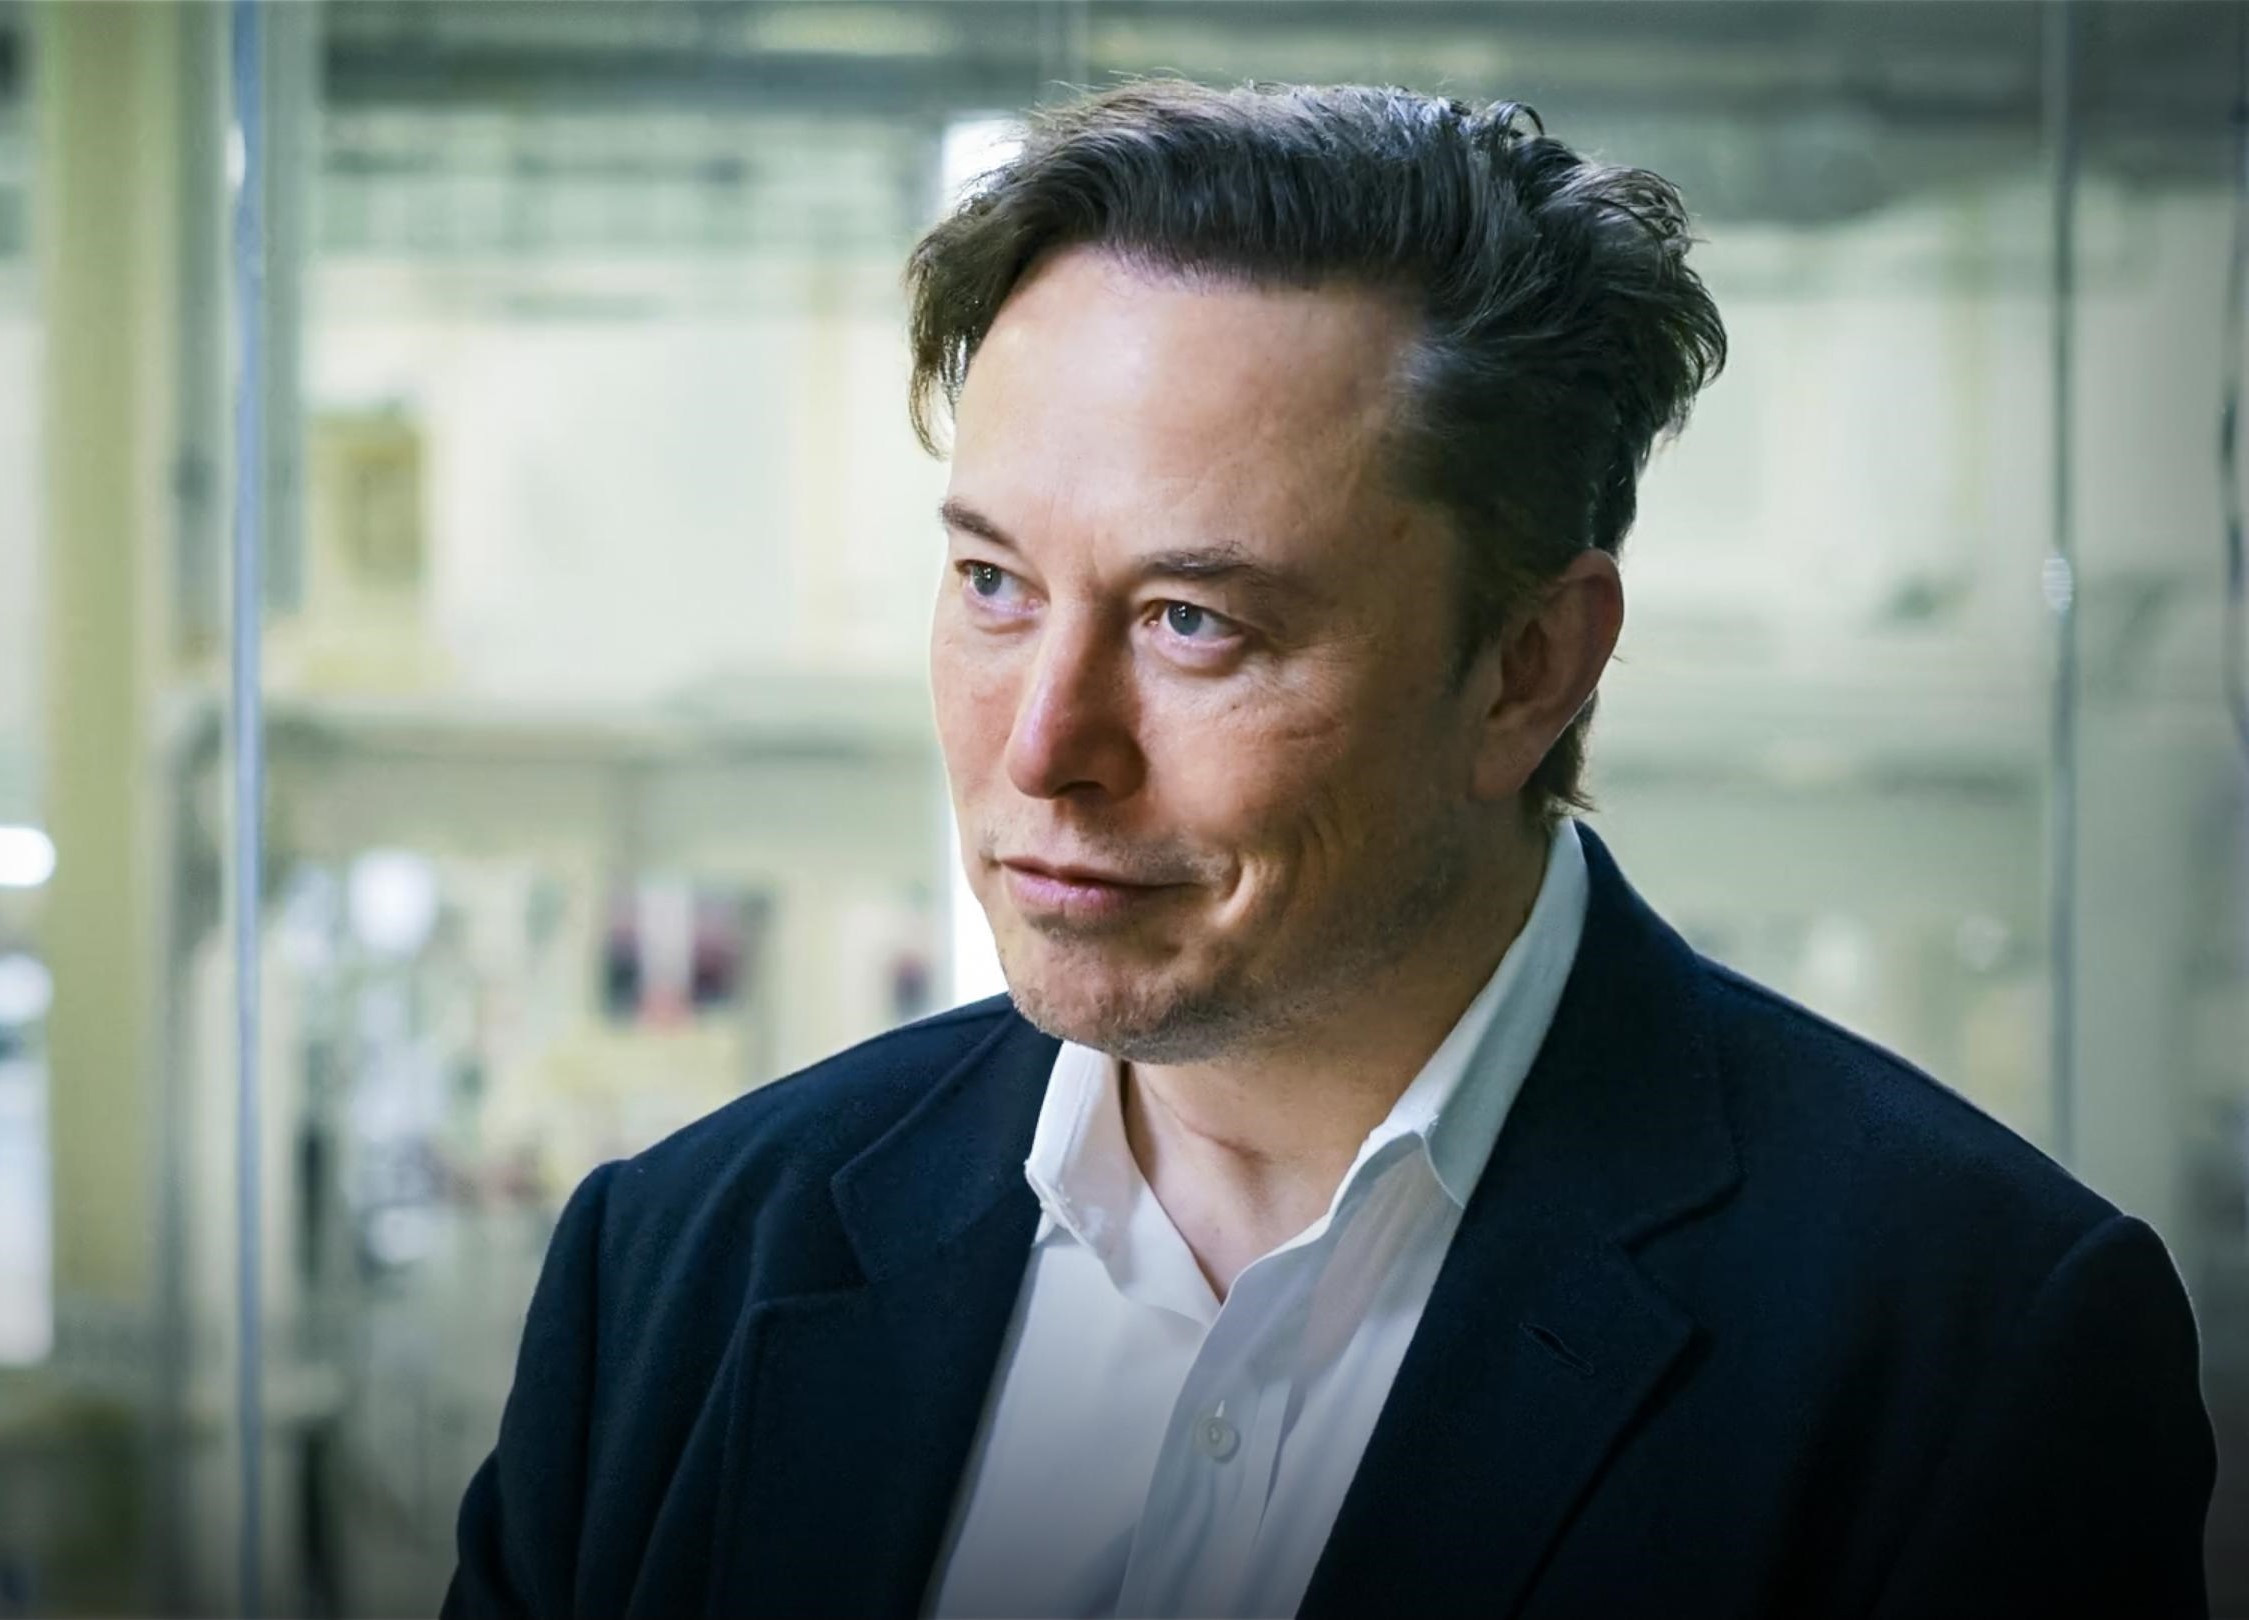 ty-phu-elon-musk-trong-video-phong-van-voi-chris-anderson-truong-ban-to-chuc-hoi-nghi-ted-anh-ted-a6eba19a38f641289a97e5a7c412118d